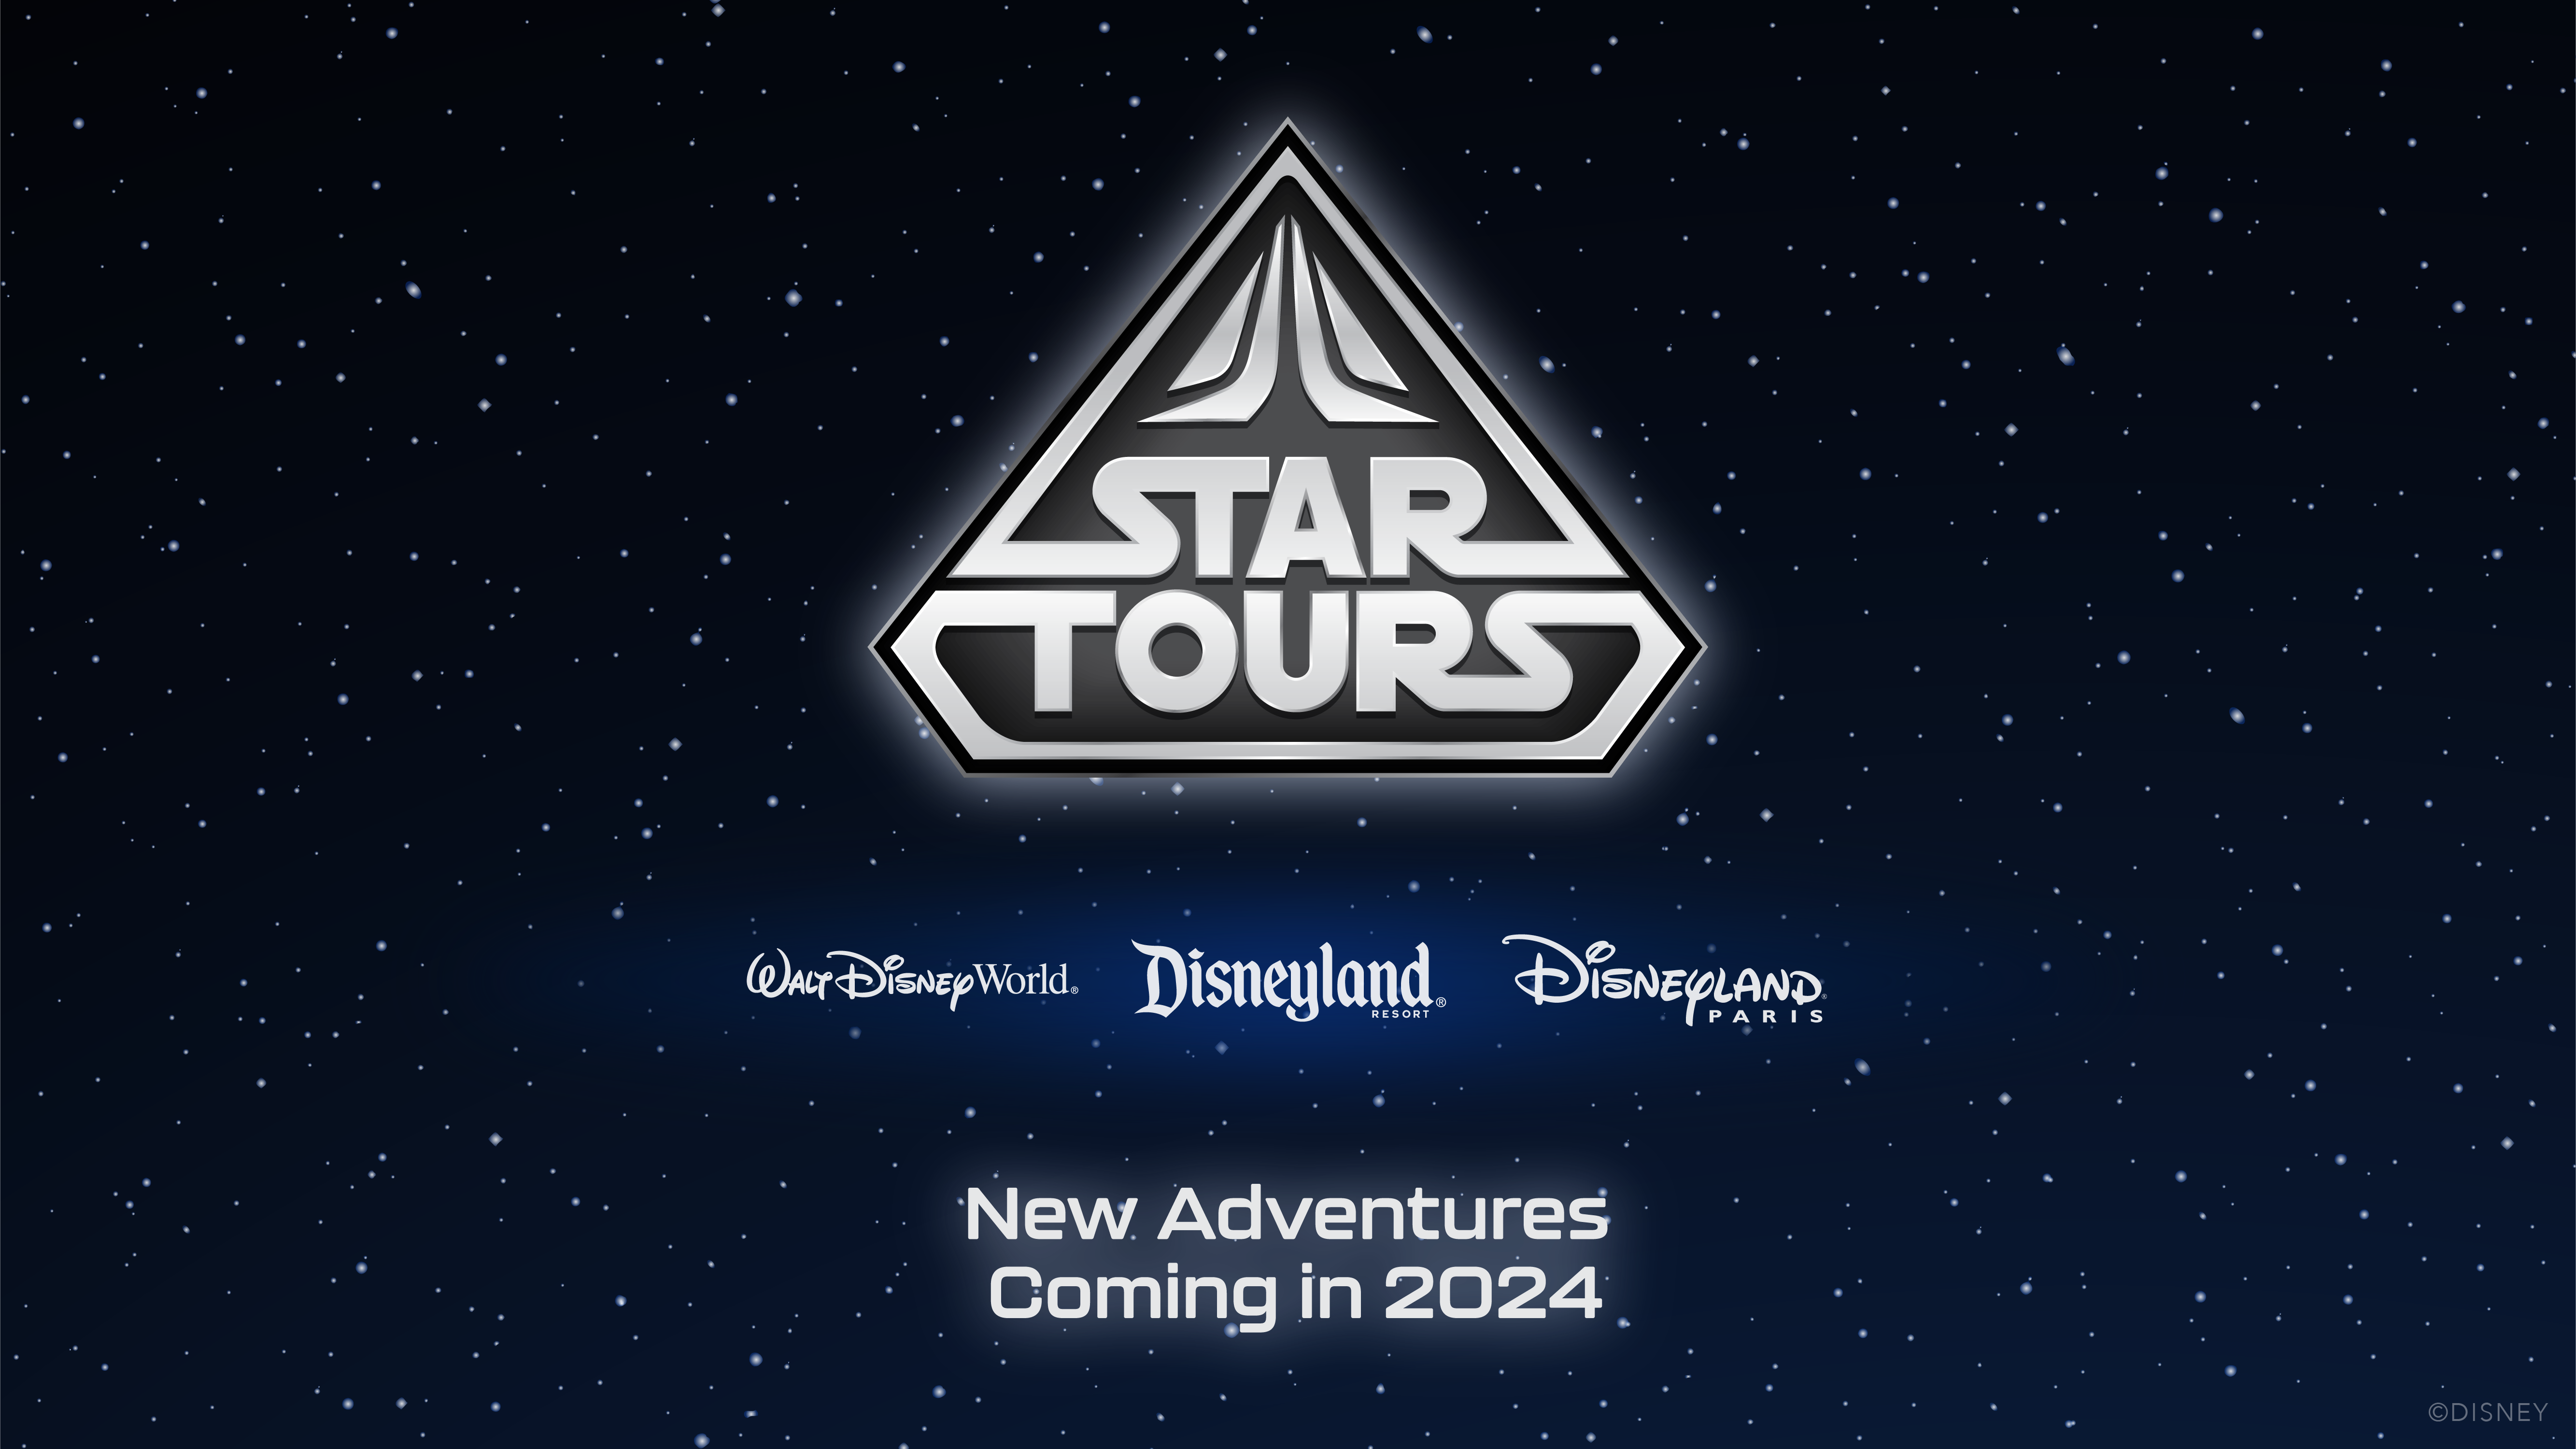 Ahsoka will become part of our popular Star Tours attraction at Disney’s Hollywood Studios in Florida, Disneyland Park in California and Disneyland Paris – beginning next spring.